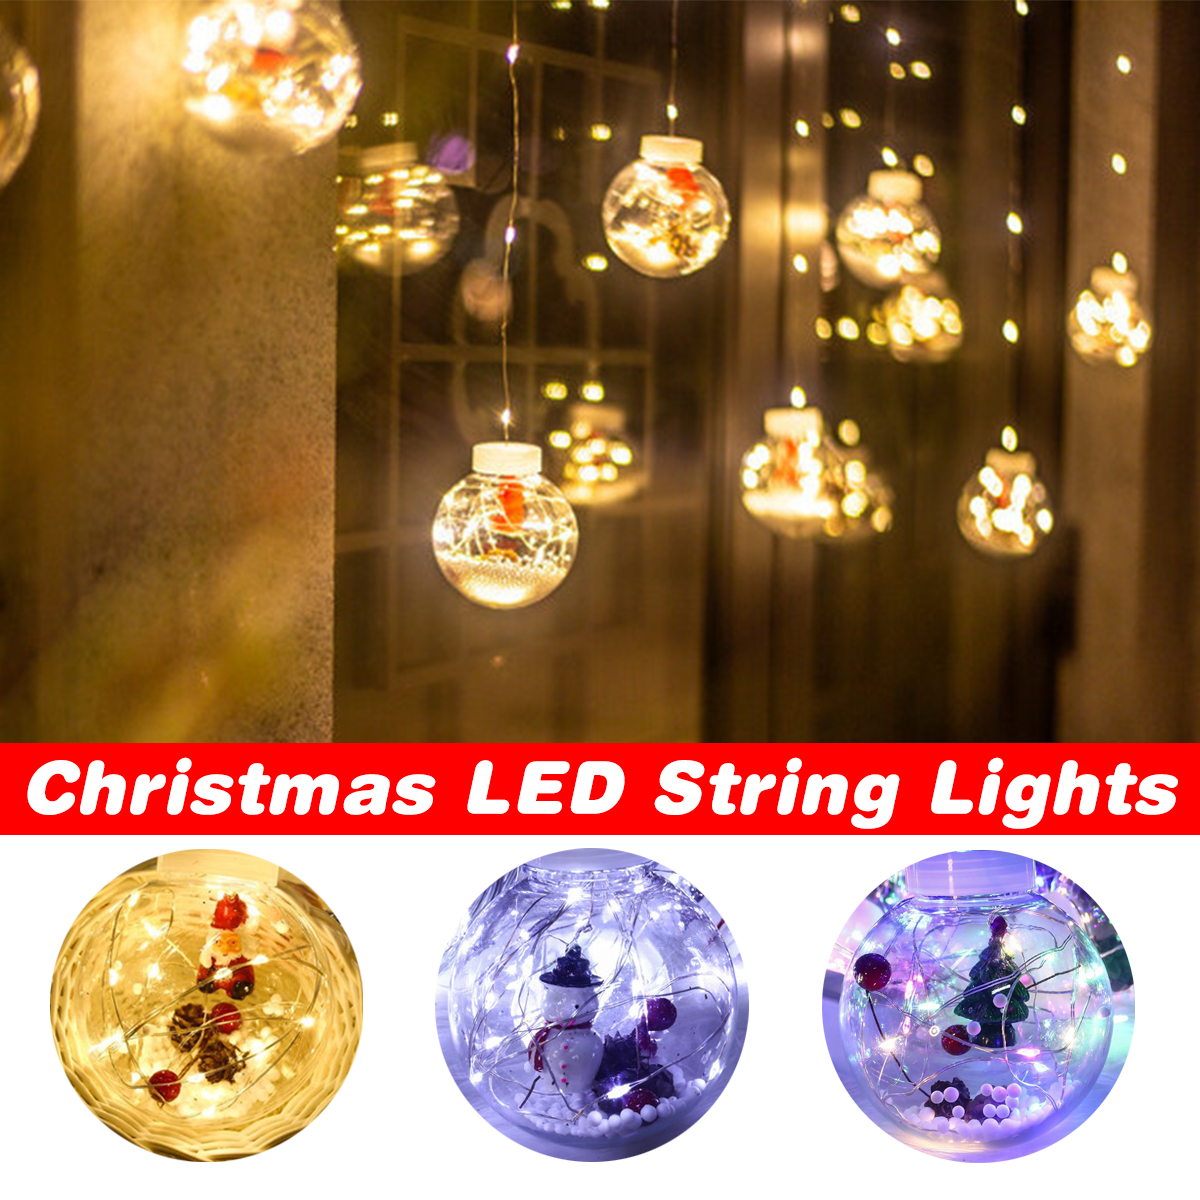 LED-Fairy-String-Curtain-Window-Lights-Holidays-Party-Waterproof-Christmas-Decorations-Lights-1782242-1